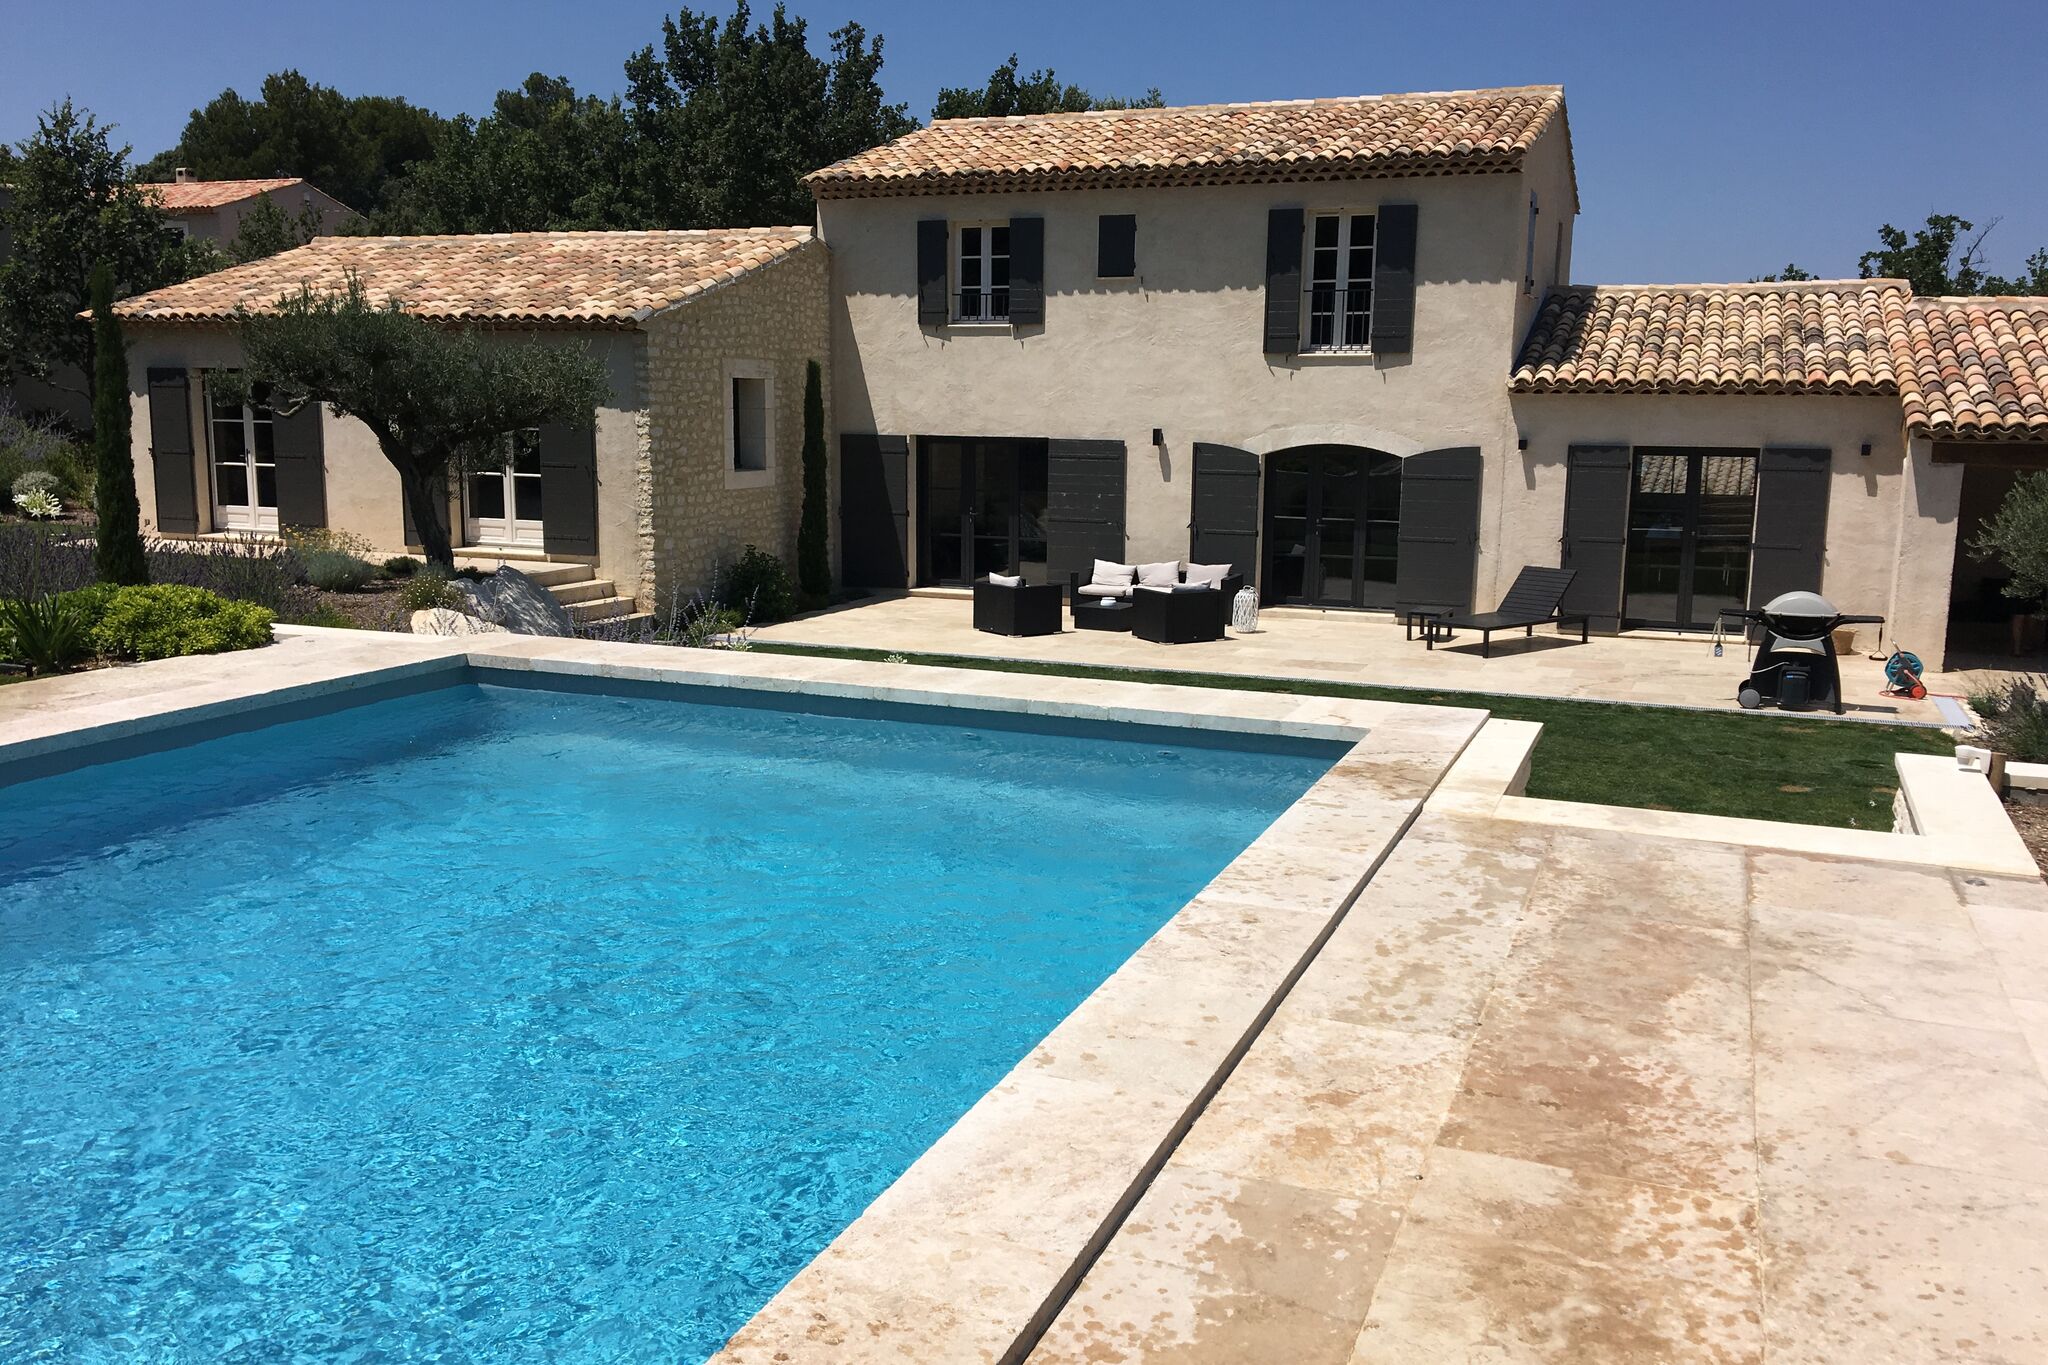 Beautiful villa with air conditioning, large private swimming pool and near St. Remy-de-Provence